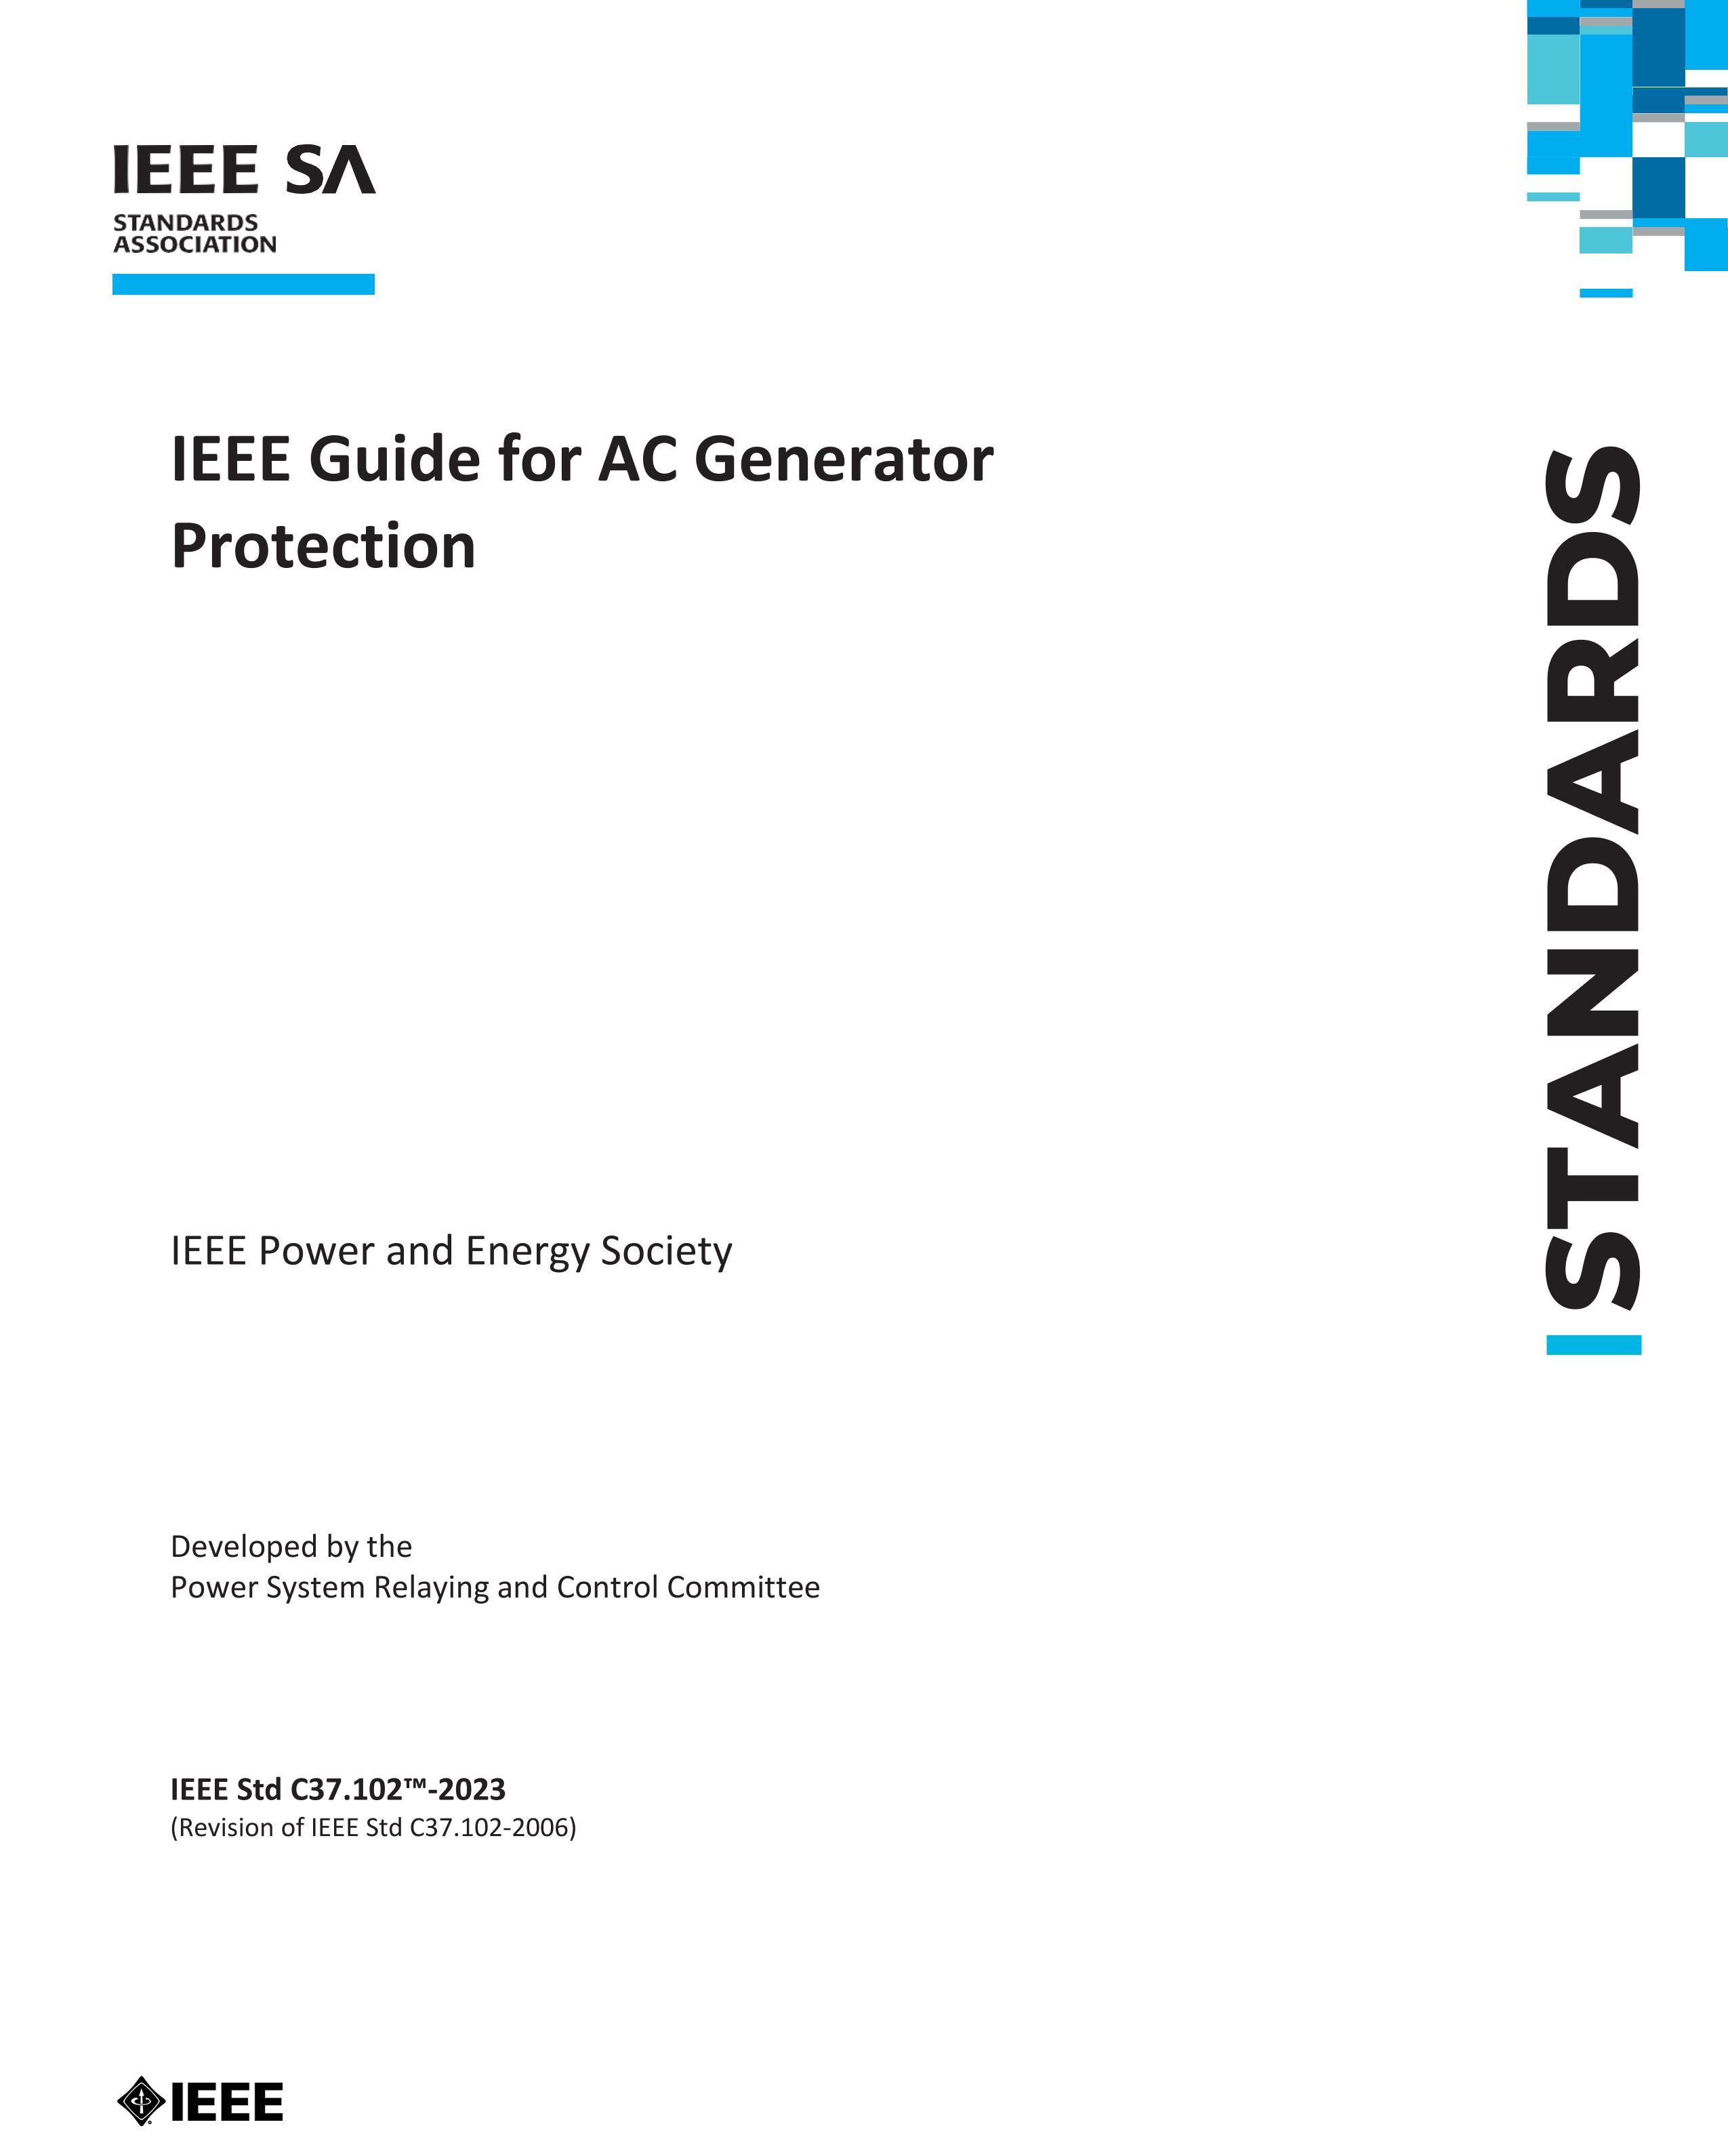 IEEE Std C37.102-2023 IEEE Guide for AC Generator Protection.pdf1ҳ